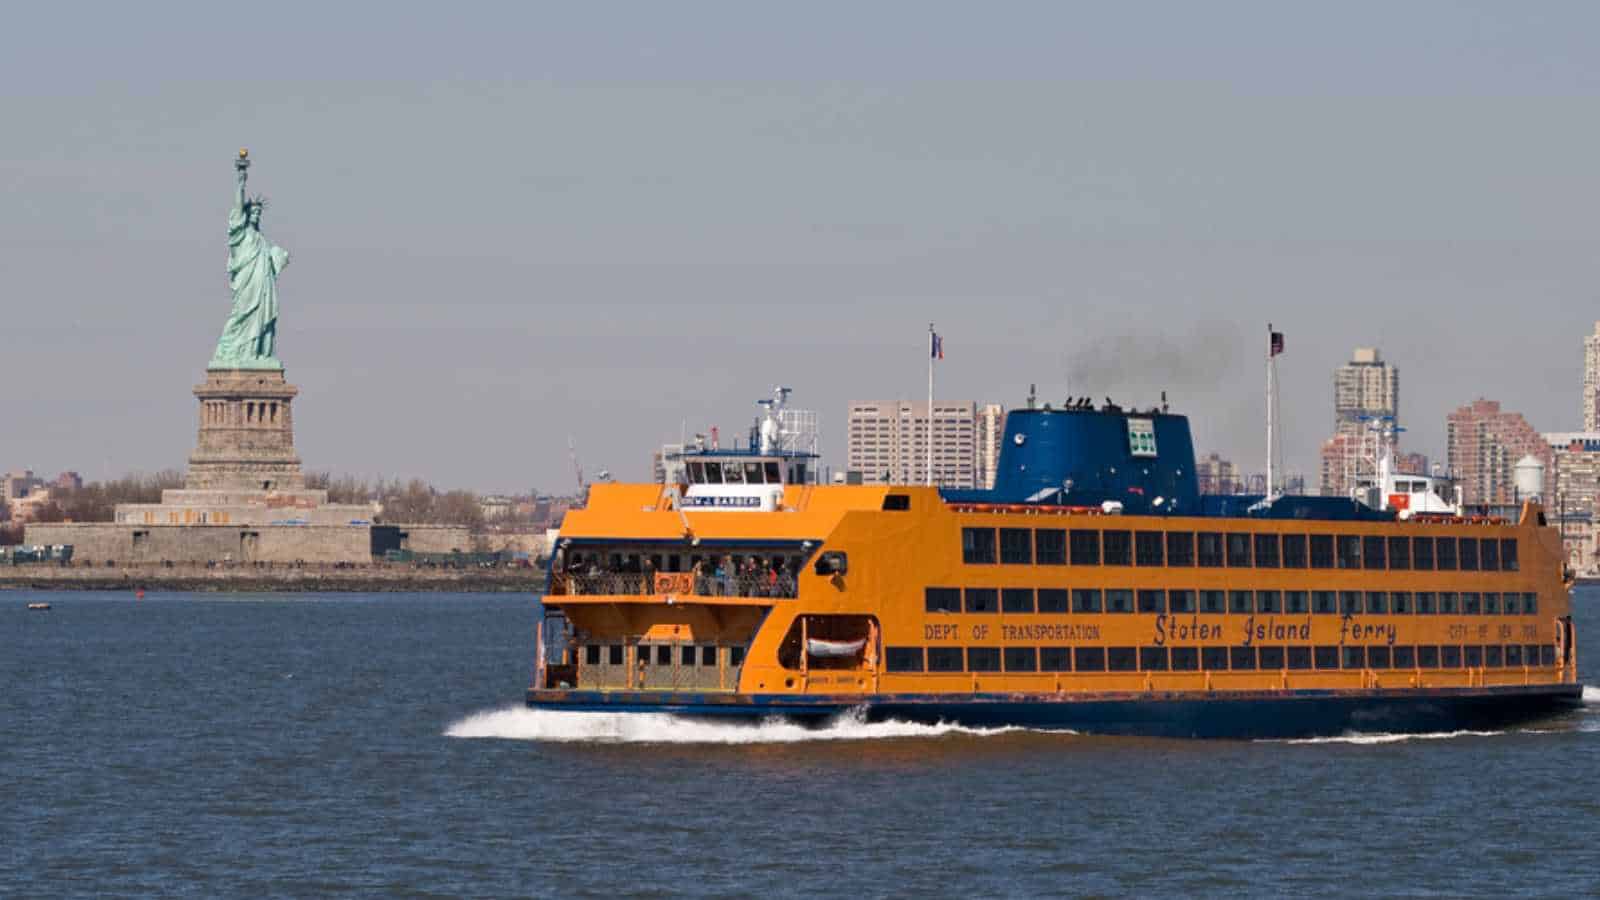 NEW YORK - MARCH 6: The Staten Island Ferry leaves Manhattan, March 6, 2012 in New York. It has been a municipal service since 1905, and currently carries over 21 million passengers annually.